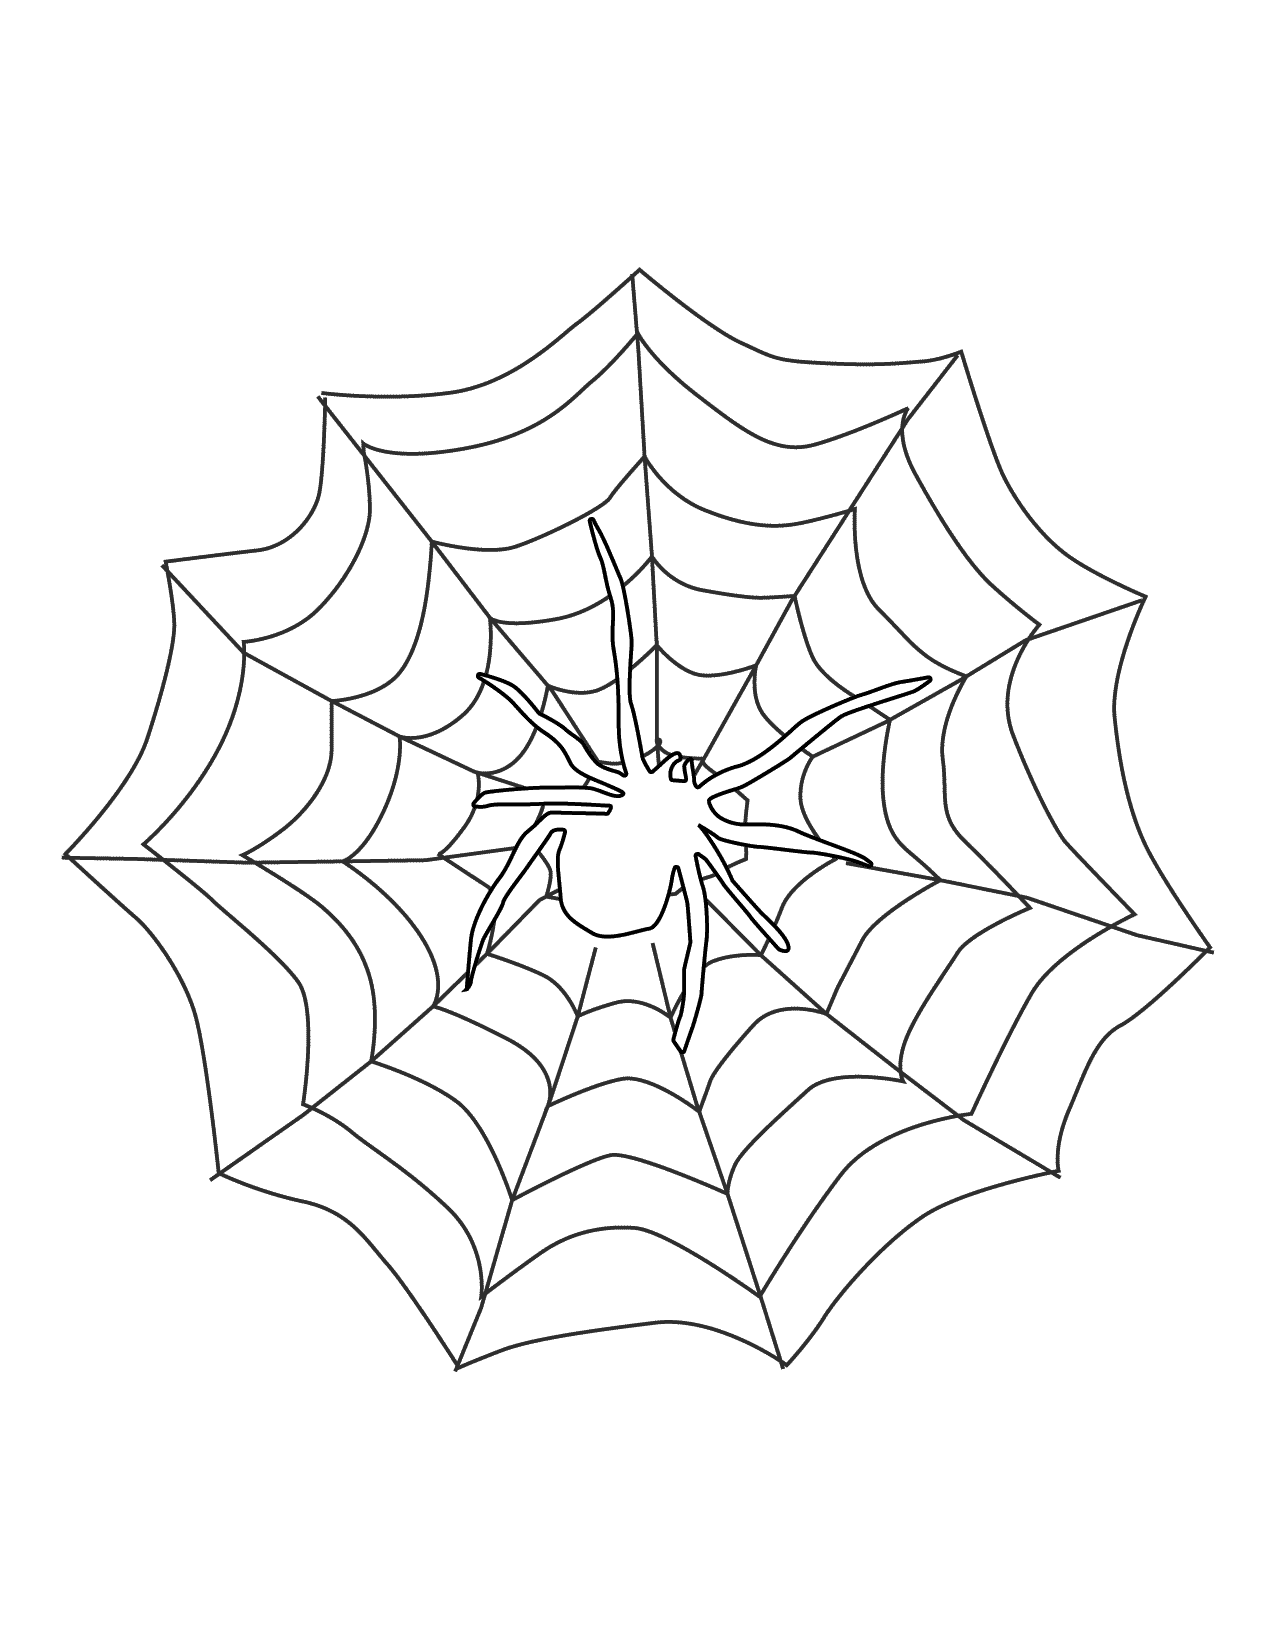 Halloween Spider Web Coloring Page